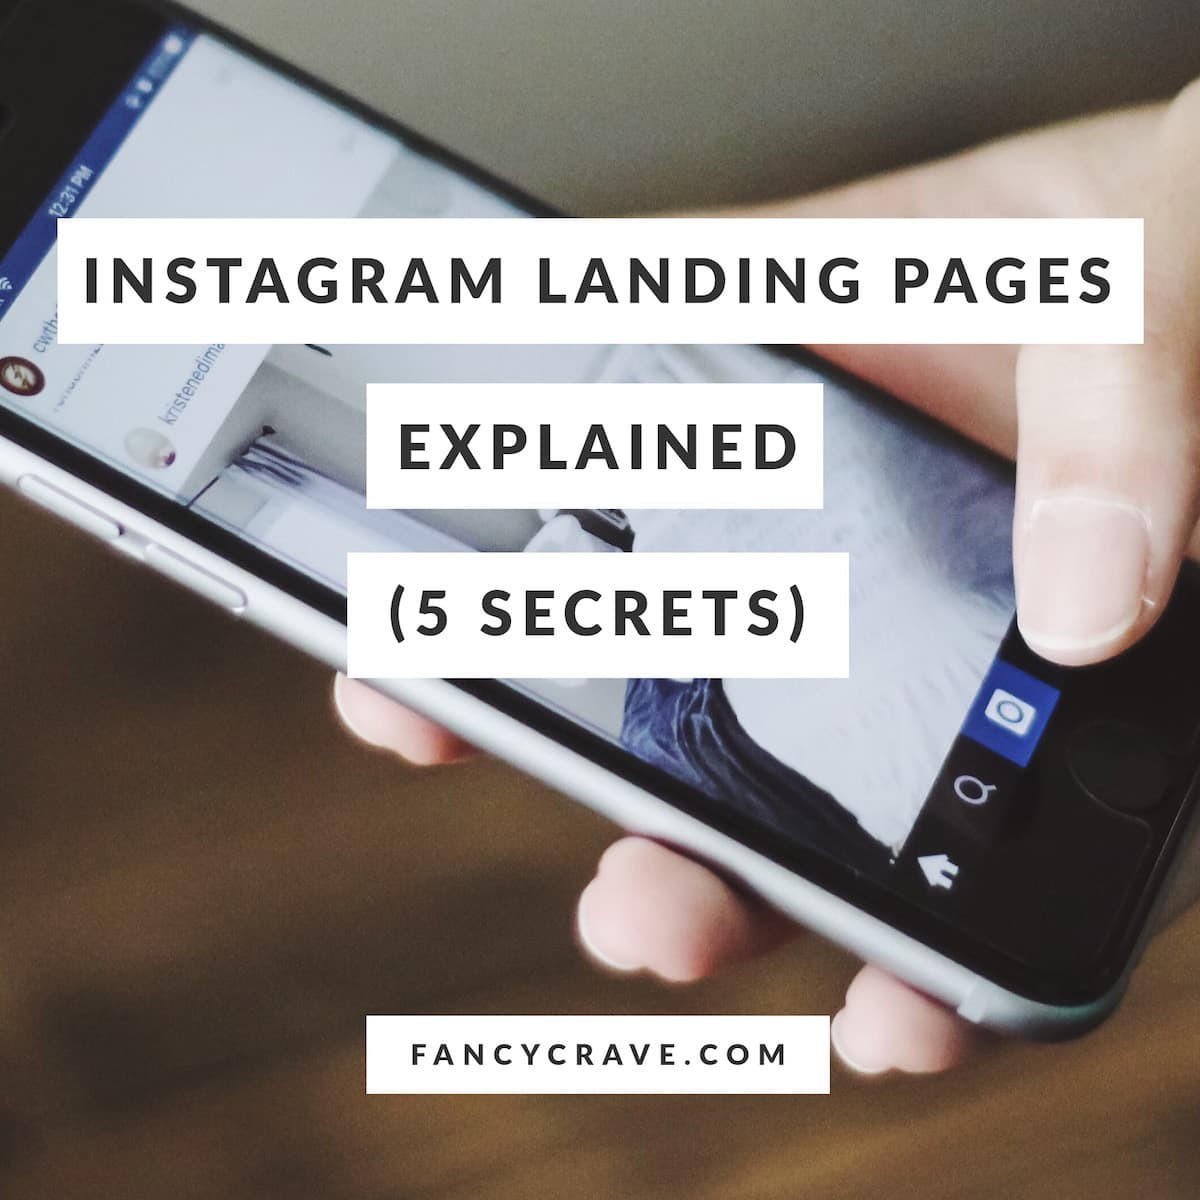 Instagram Landing Pages Explained